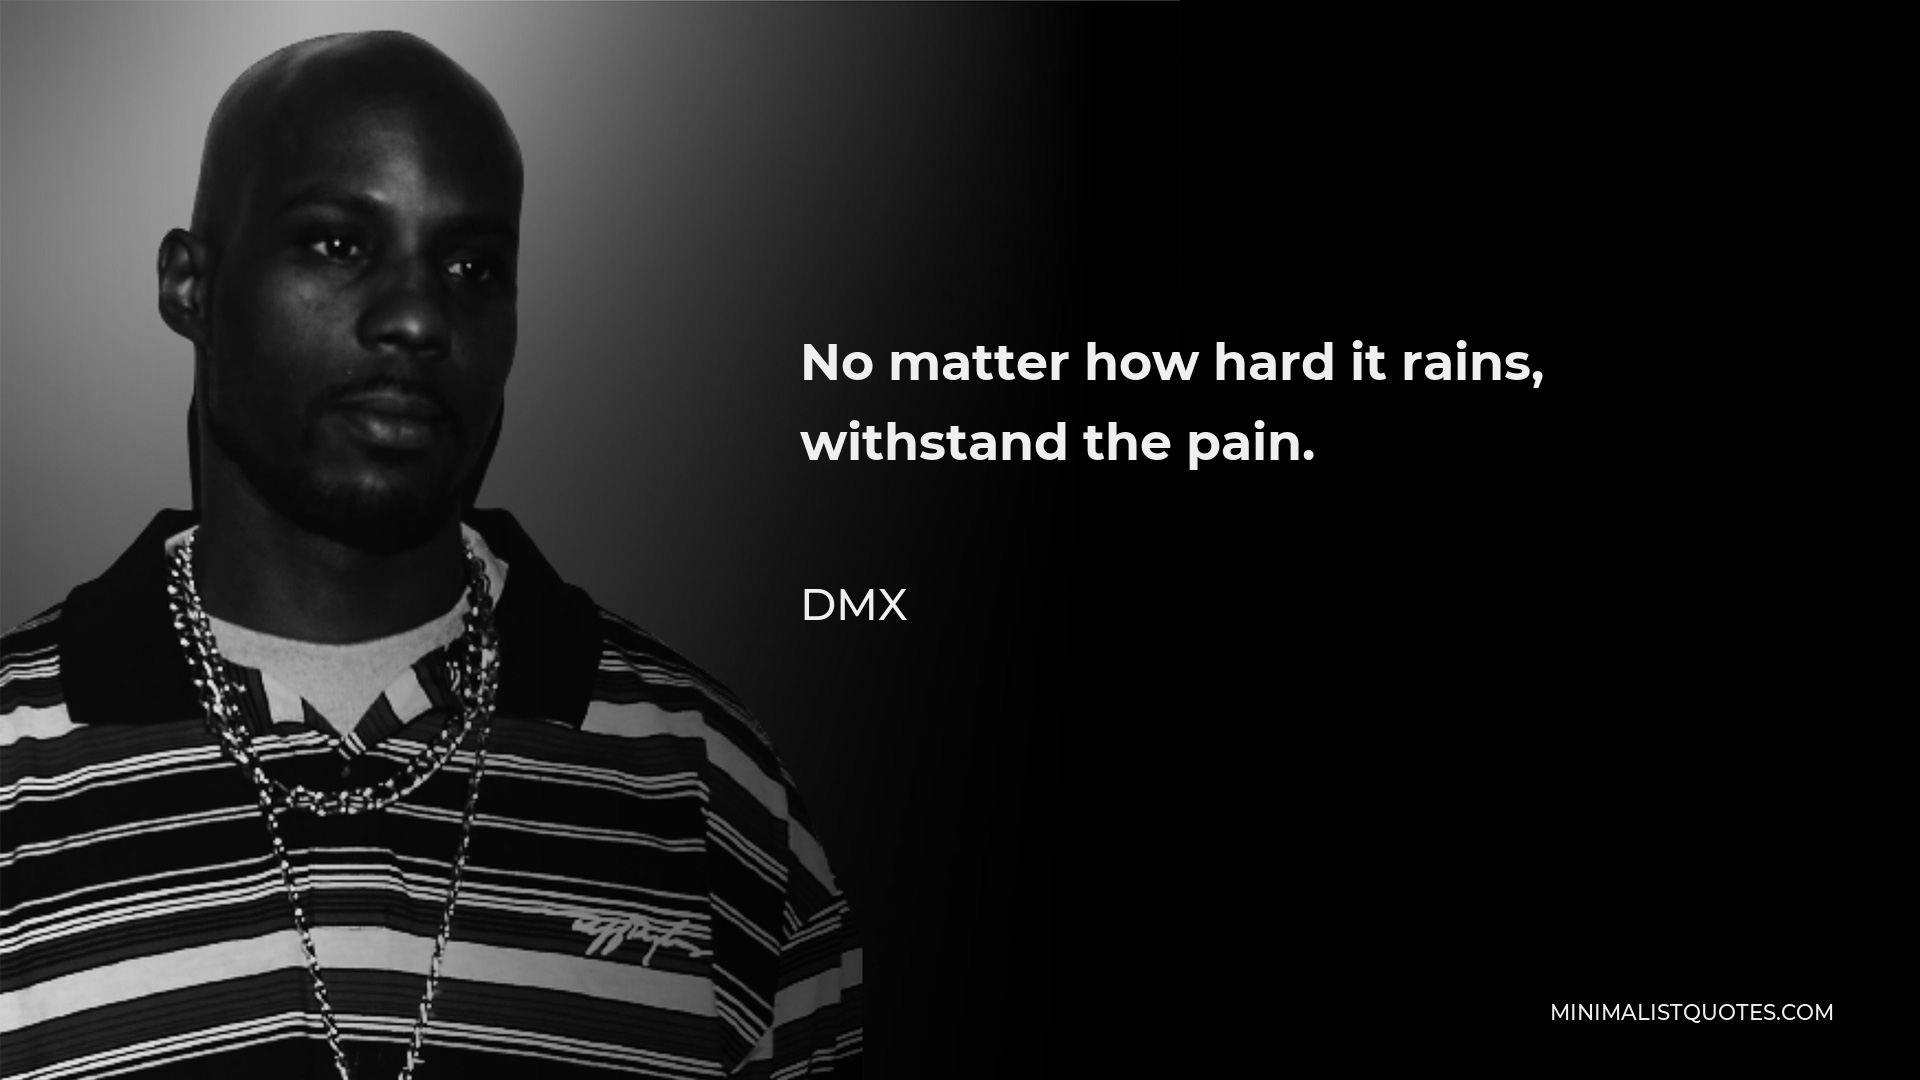 DMX Quote - No matter how hard it rains, withstand the pain.